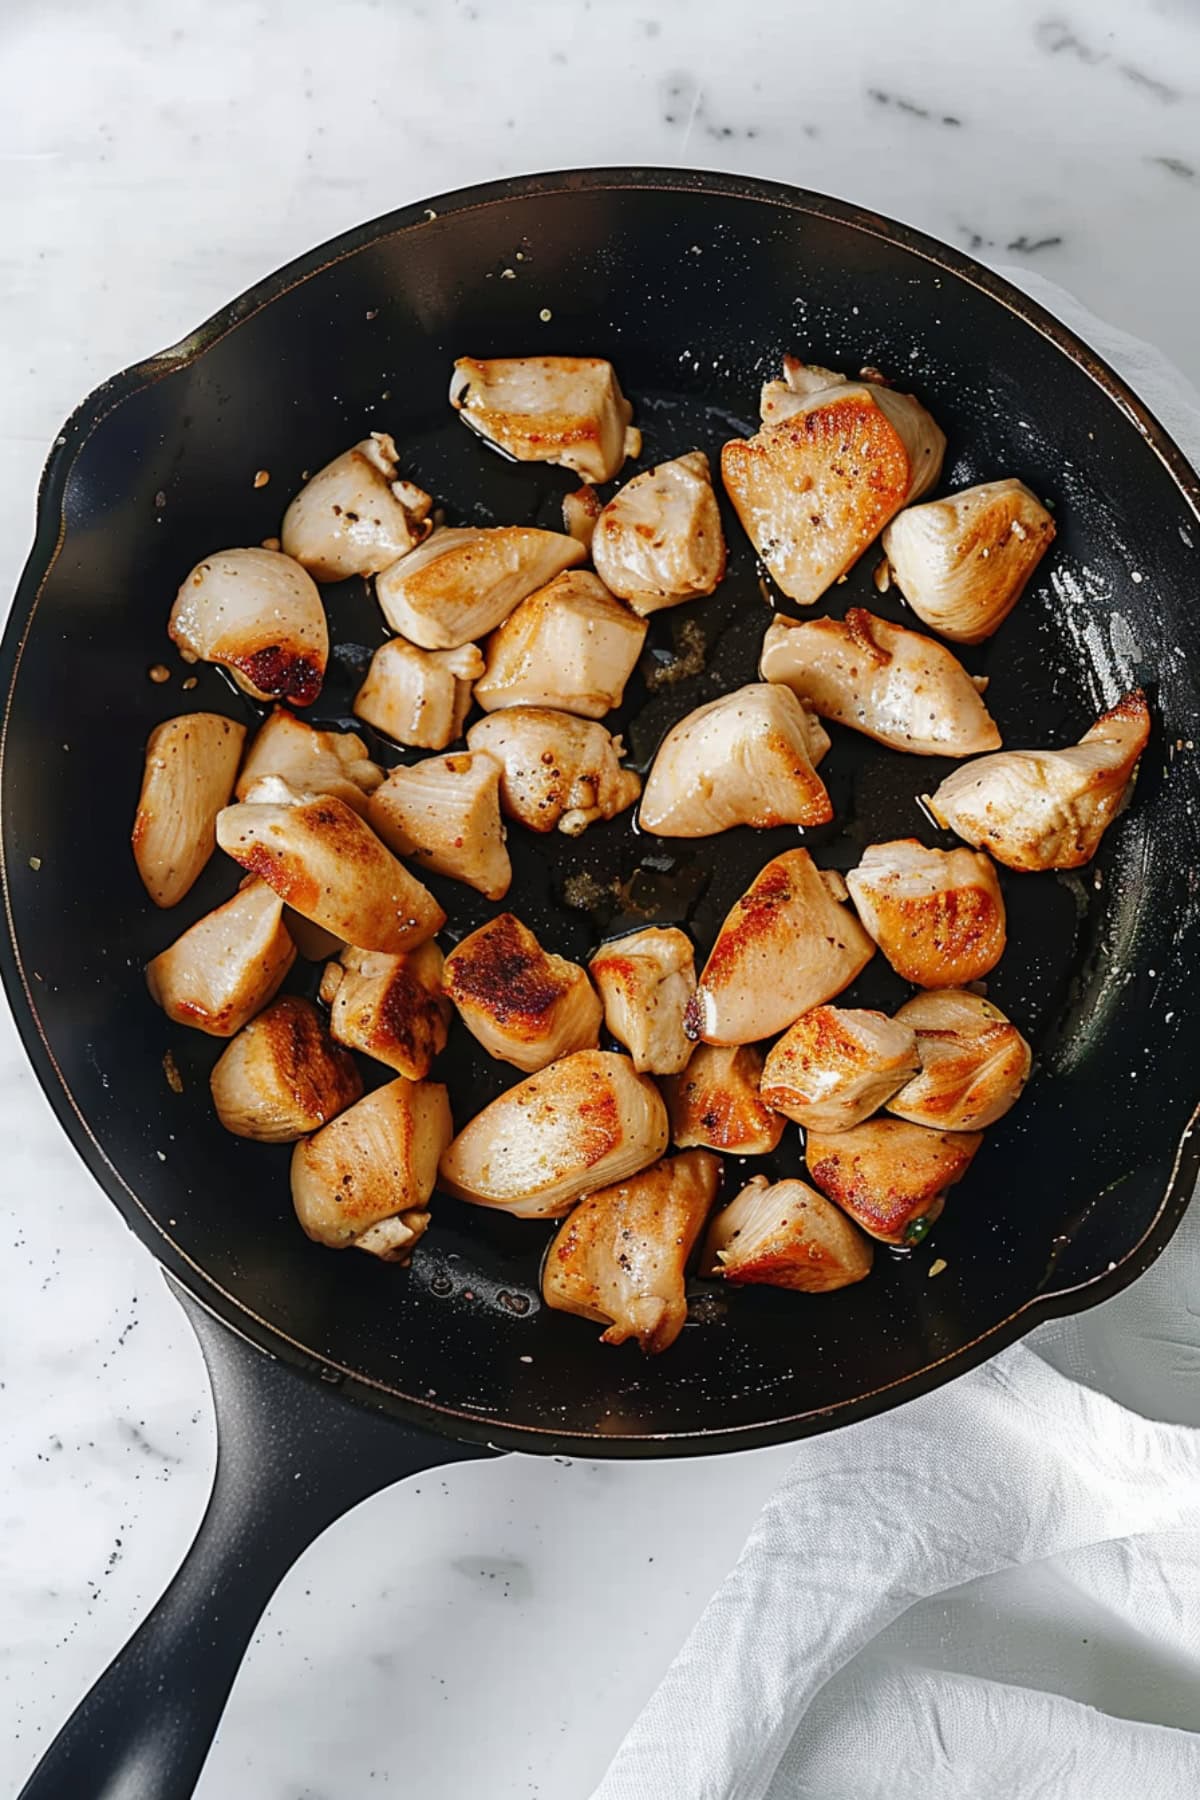 A black skillet of cooked chicken pieces on a white marble table.